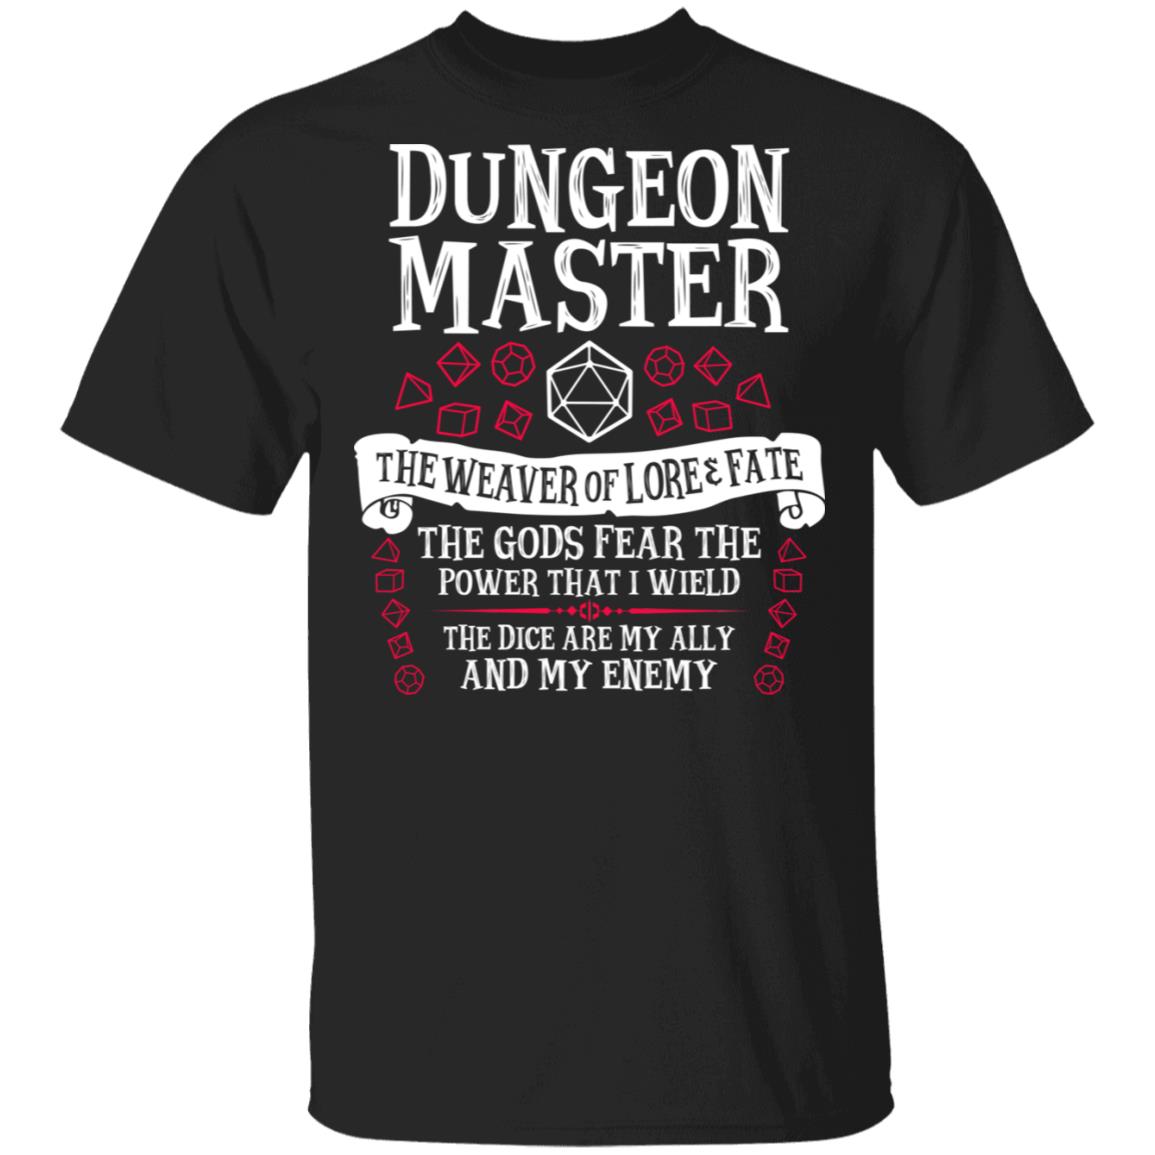 Dungeon Master, The Weaver Of Lore & Fate - Dungeons & Dragons T-Shirts ...